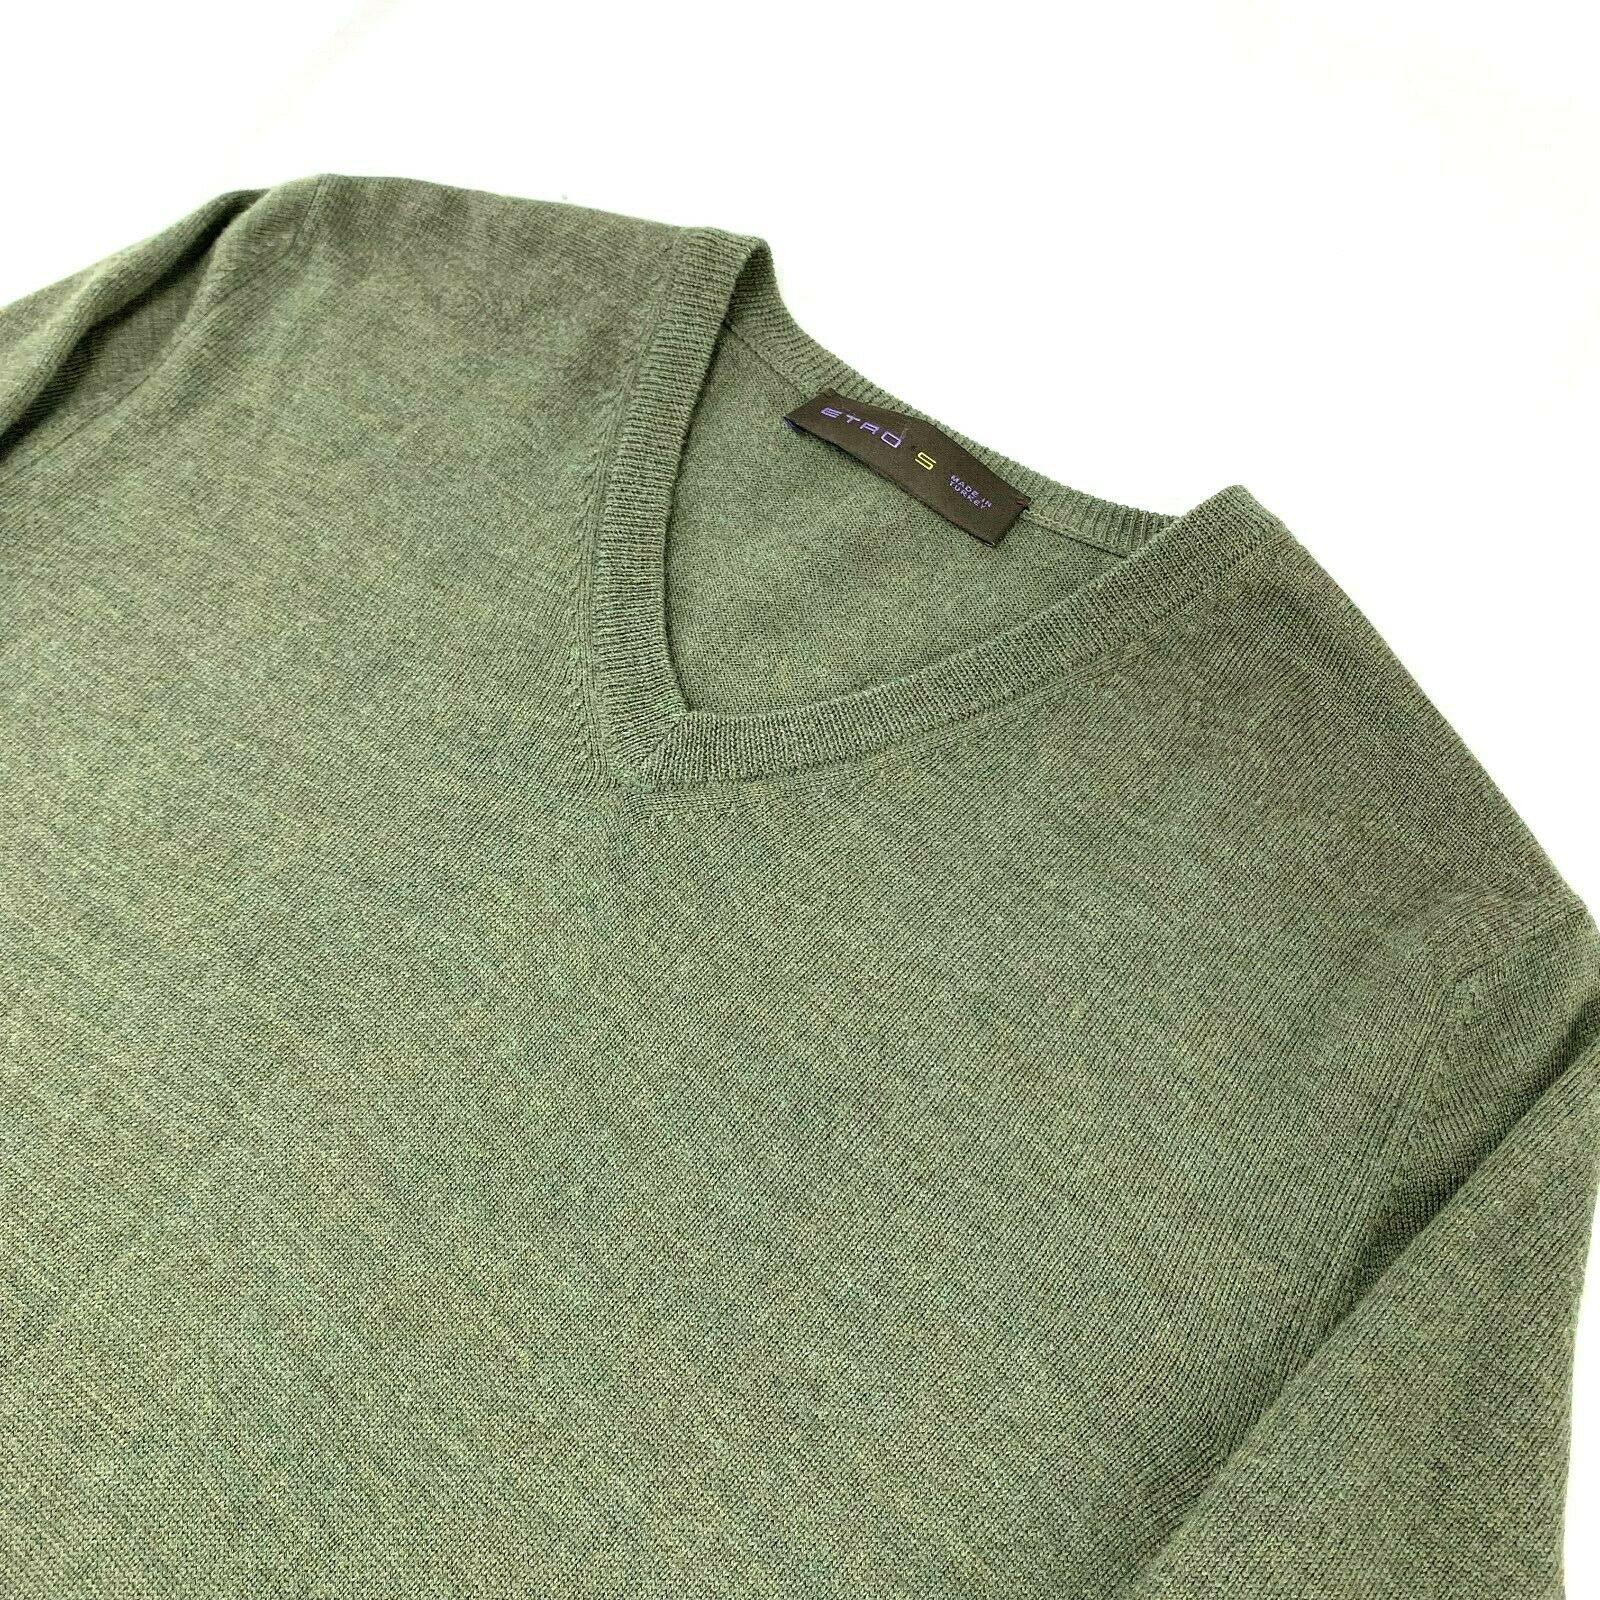 Etro Milano Green V-Neck Wool Sweater with Paisley Fringe Small Slim Fit - Genuine Design Luxury Consignment